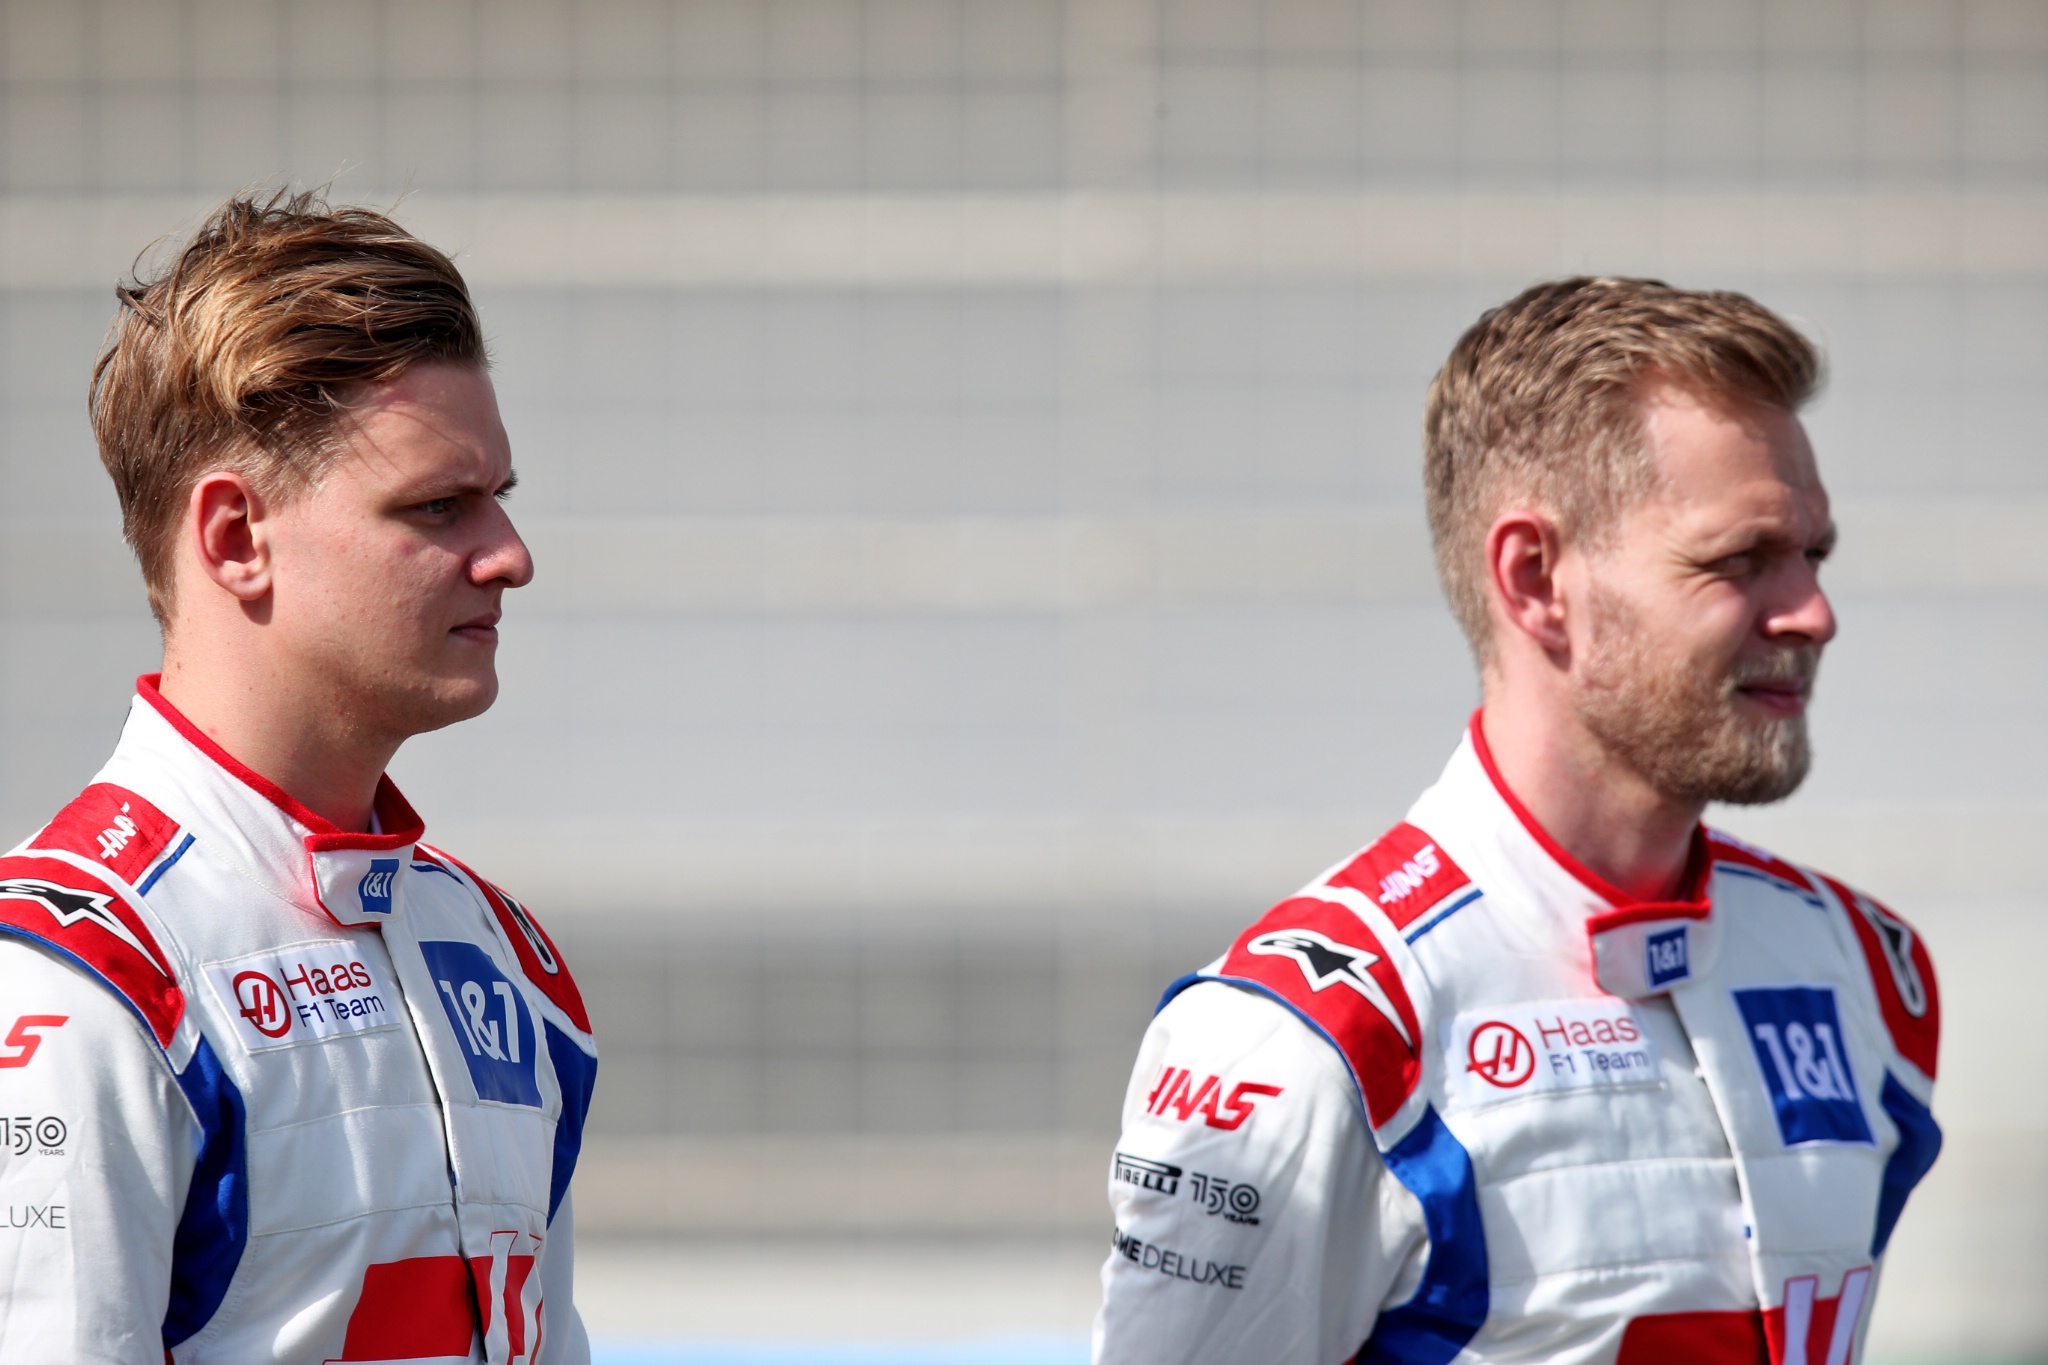 (L to R): Mick Schumacher (GER) Haas F1 Team and Kevin Magnussen (DEN) Haas F1 Team.